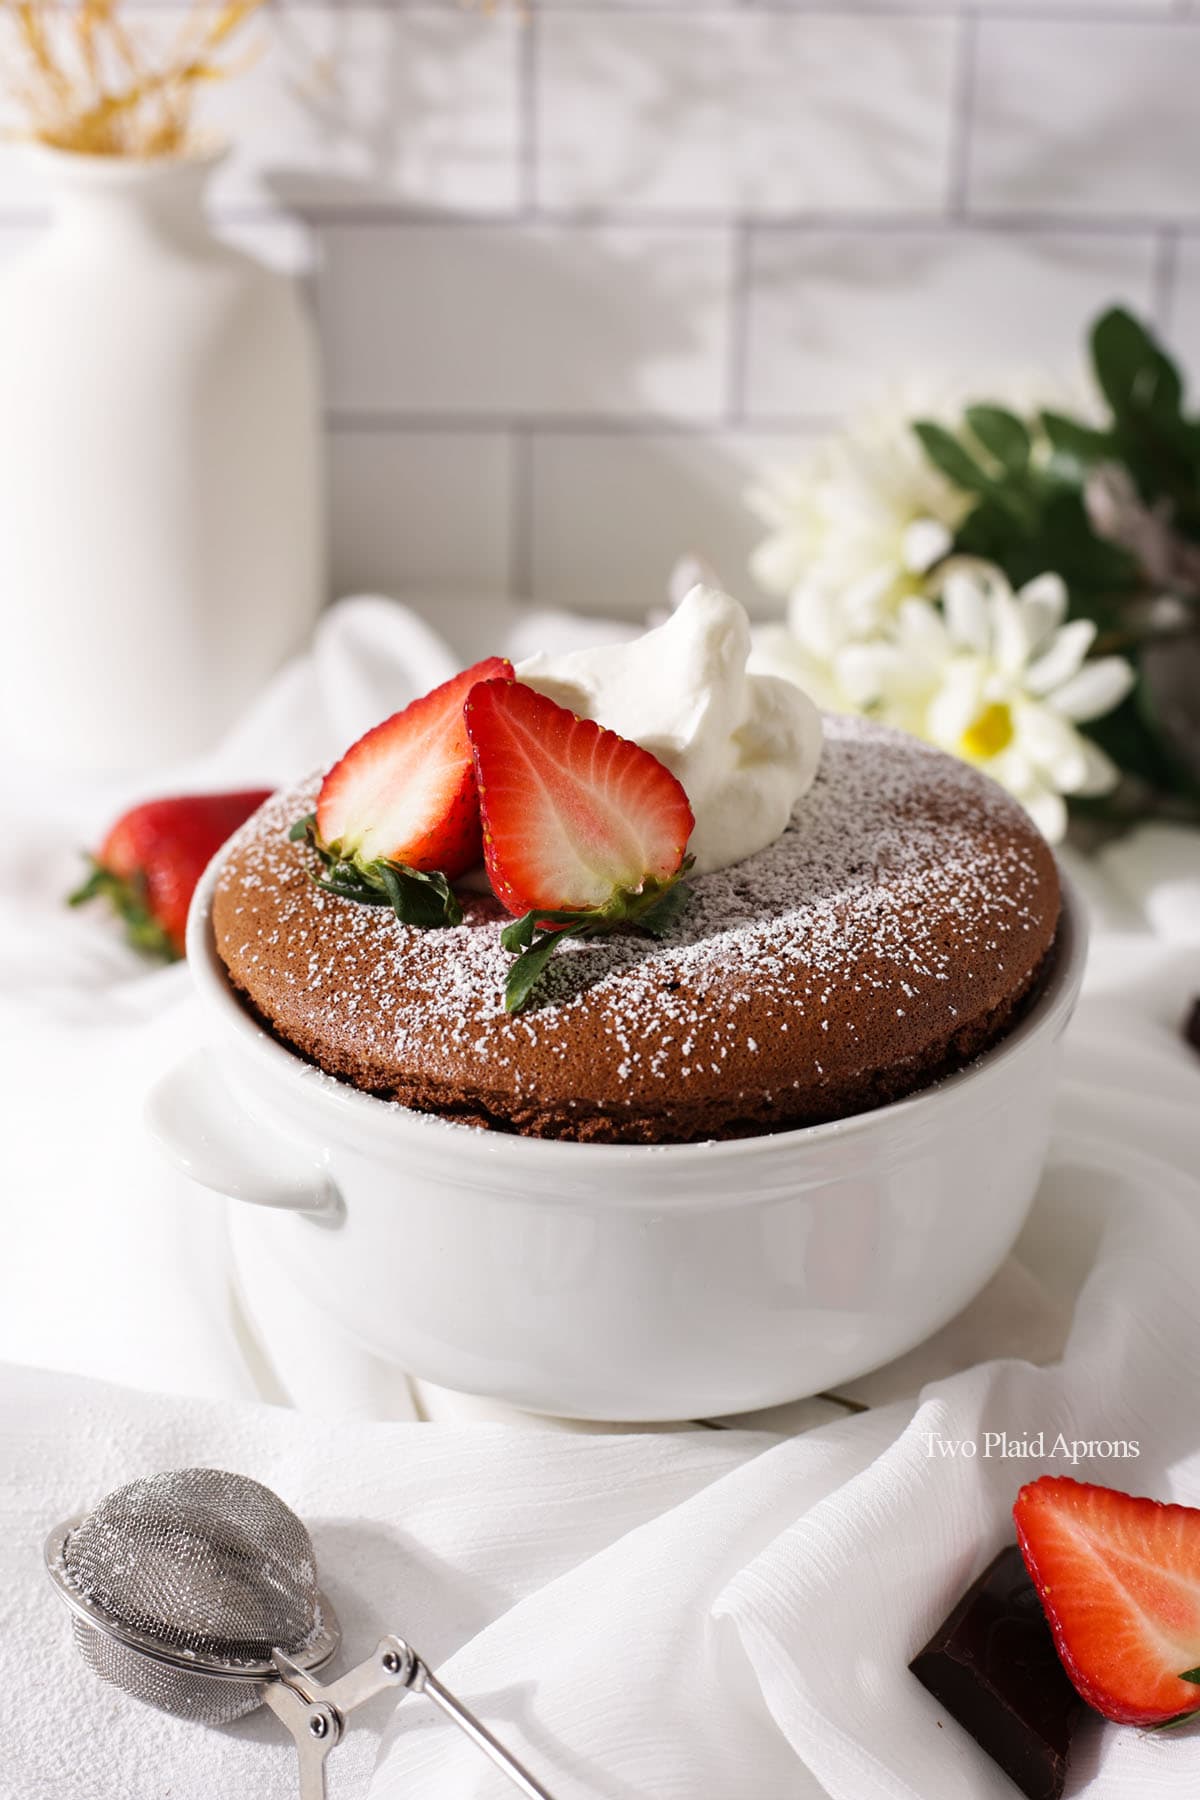 Flourless chocolate soufflé with strawberries, chocolate chips, and chocolate ganache.